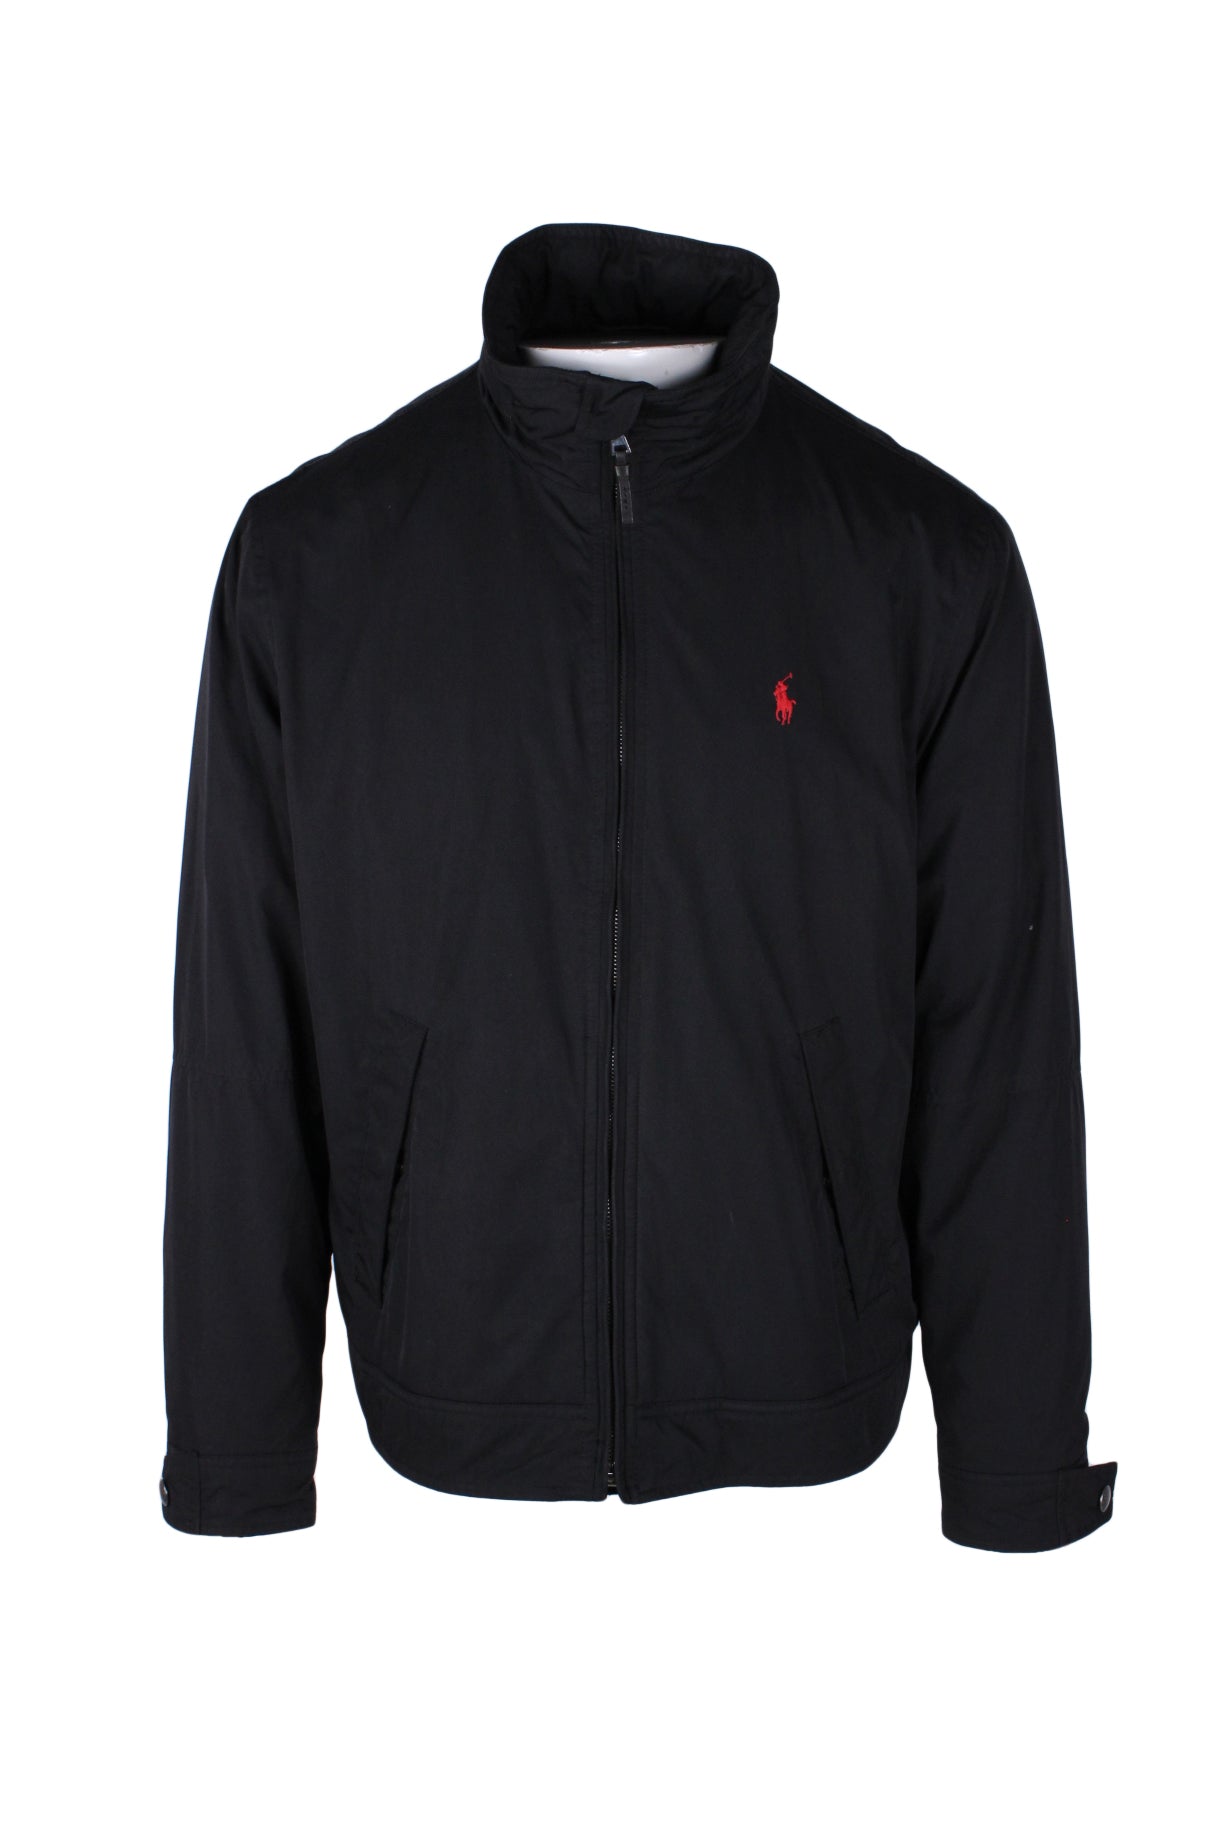 front view of polo by ralph lauren black zip up jacket. features logo embroidered at left breast, side snap hand pockets, inner snap pockets, snaps at cuffs, partially fleece lined, with optional zip out hood within collar.